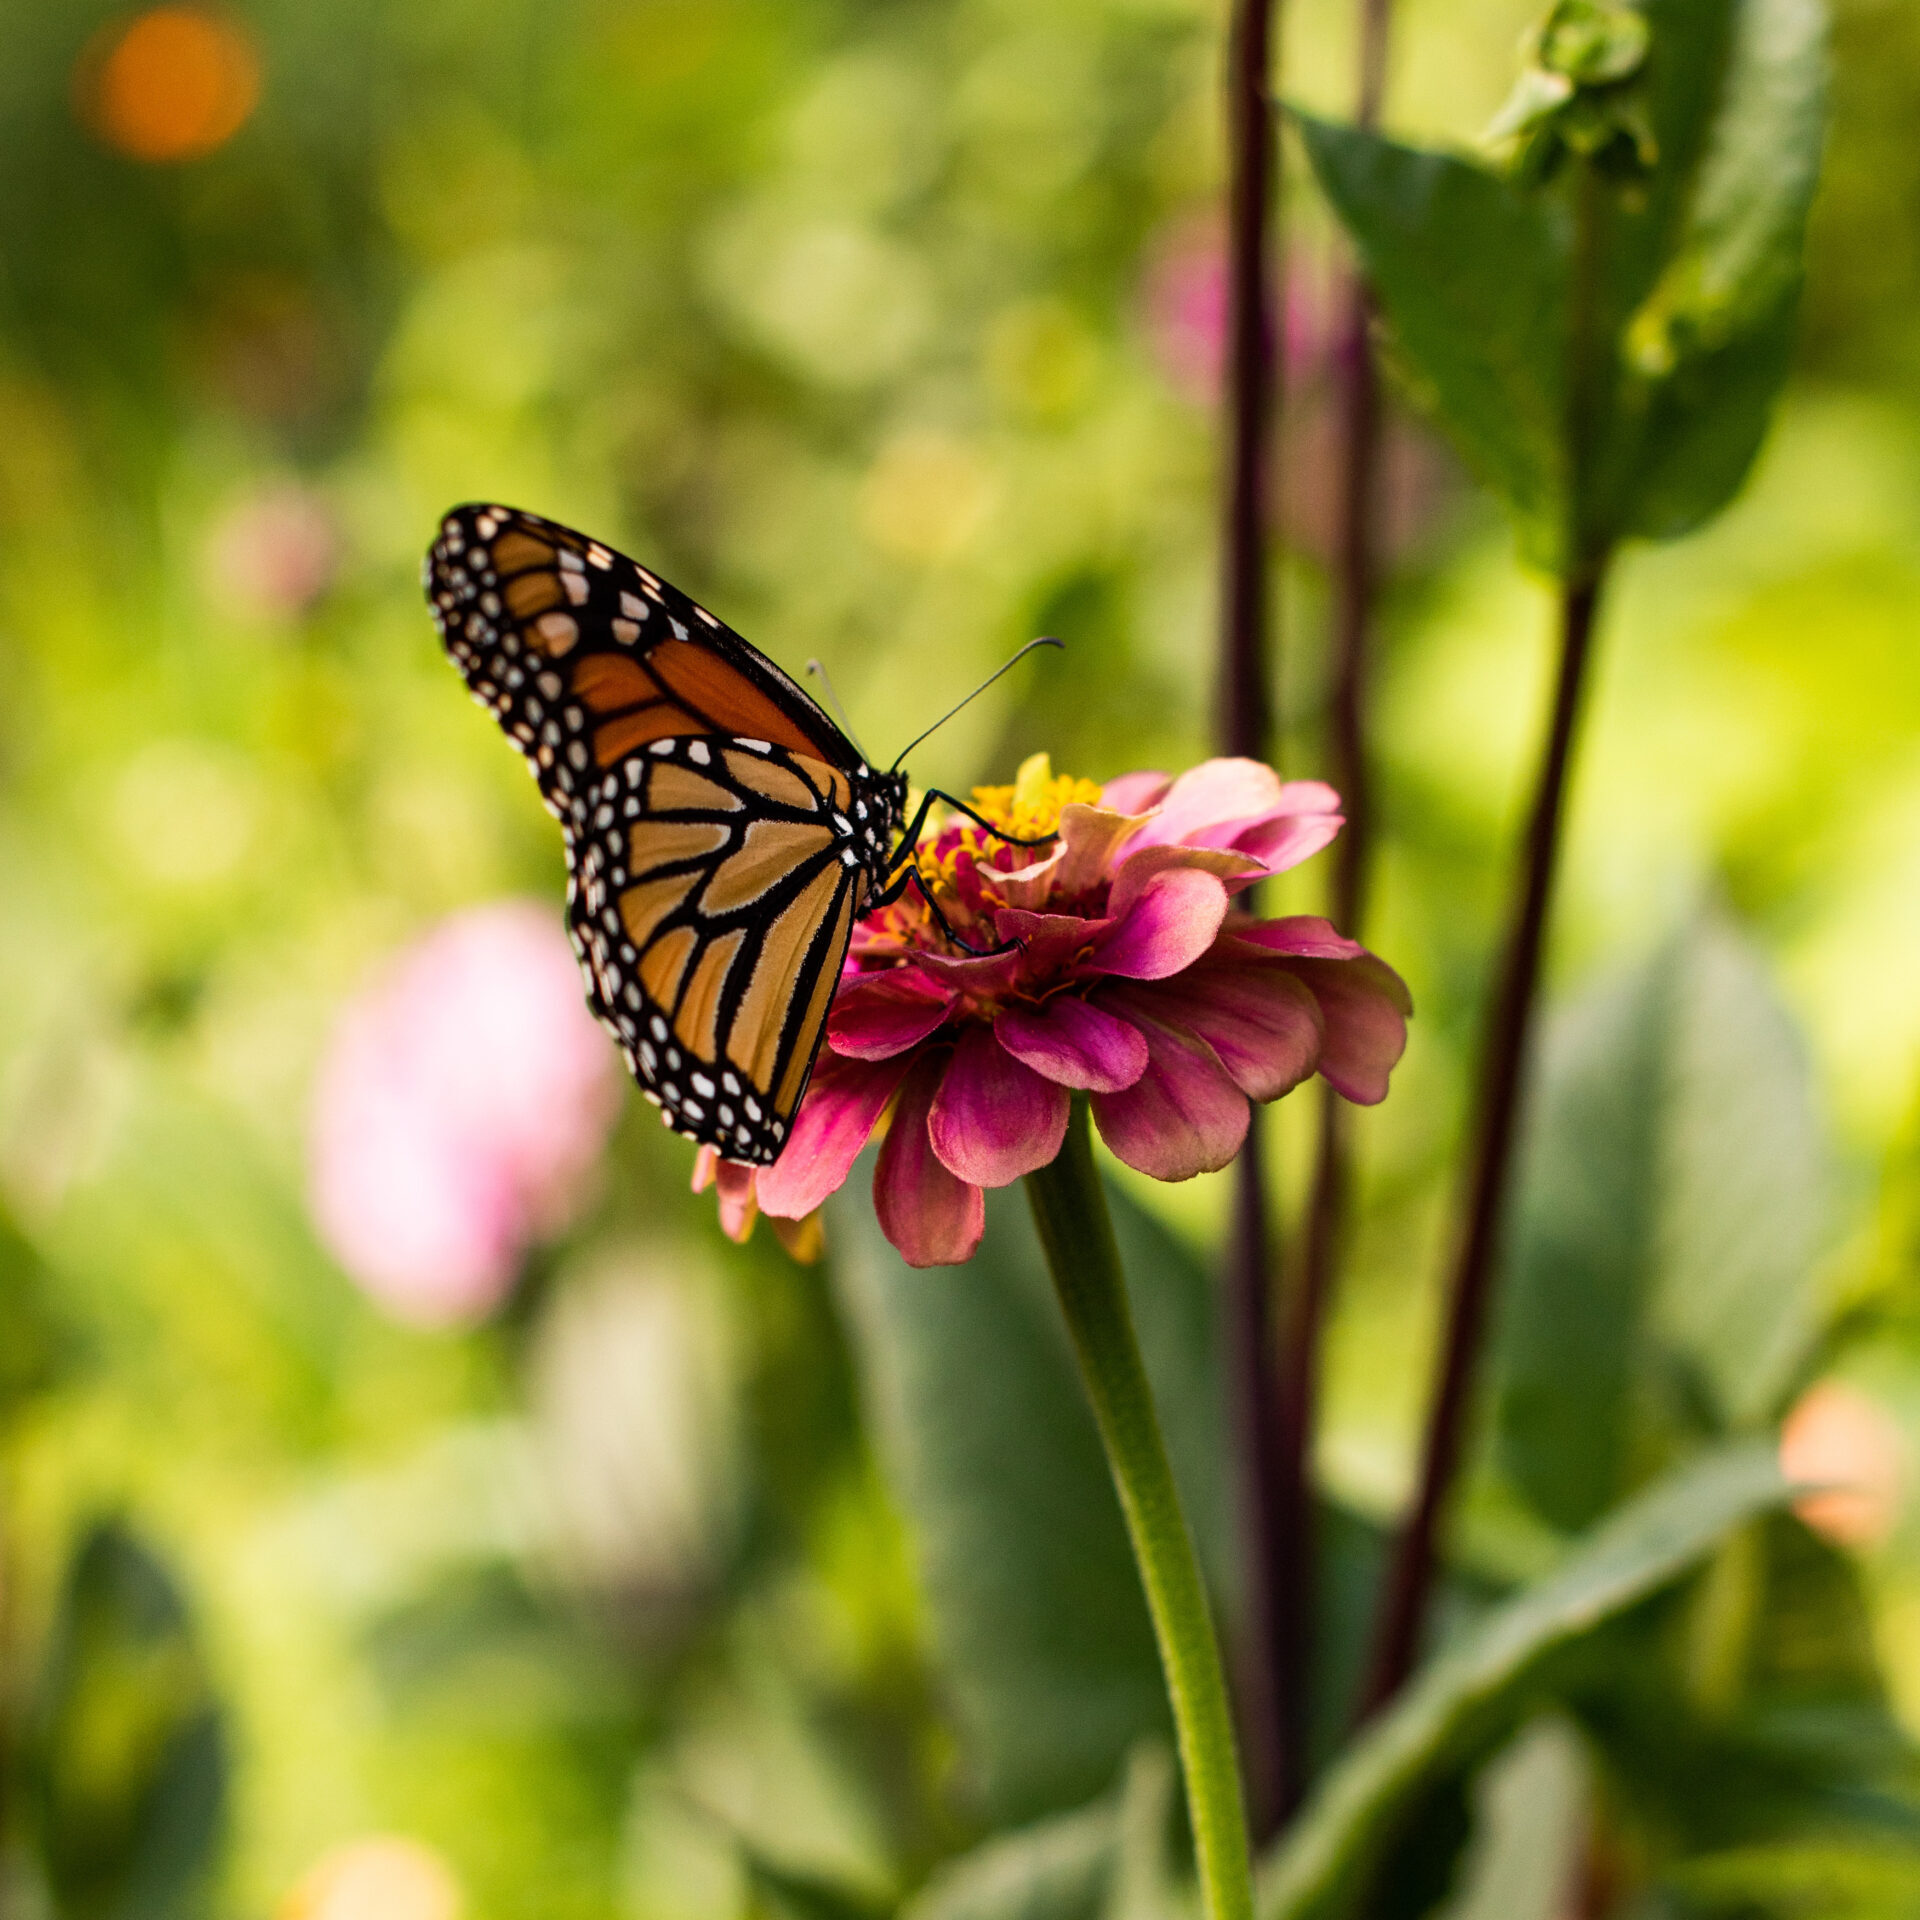 A butterfly is sitting on the flower.